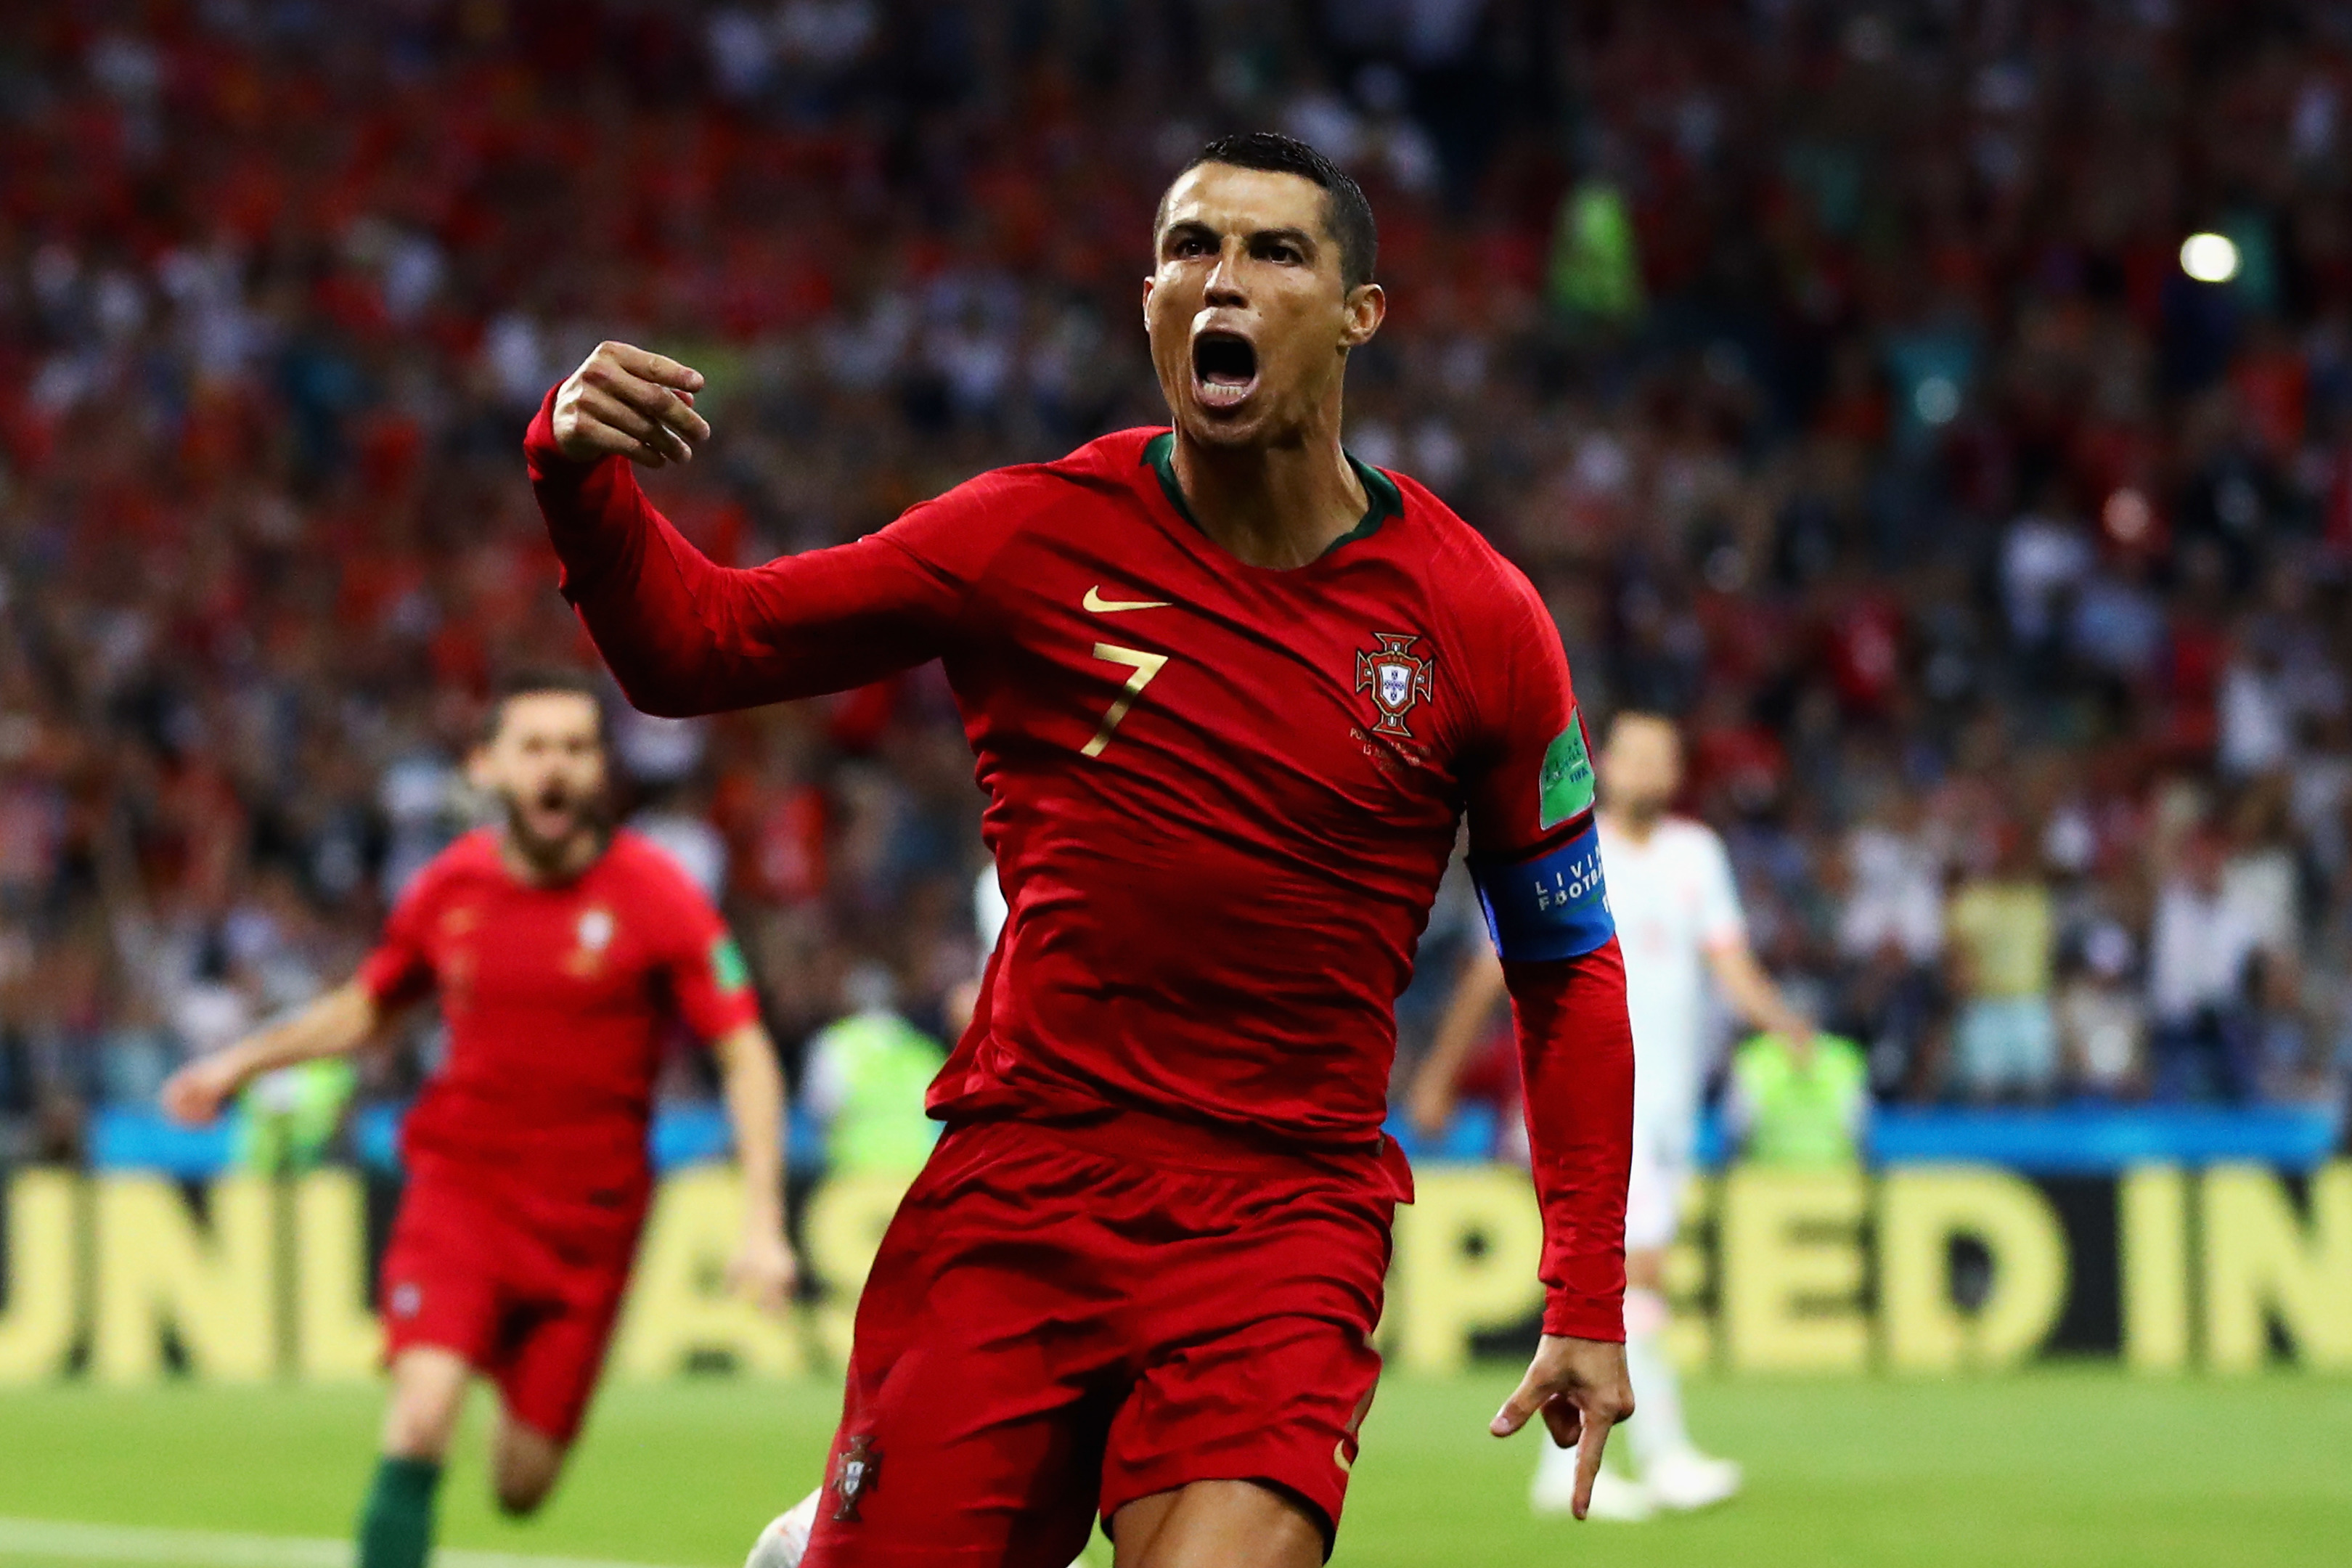 Cristiano Ronaldo celebrates after scoring against Spain (Dean Mouhtaropoulos/Getty Images)